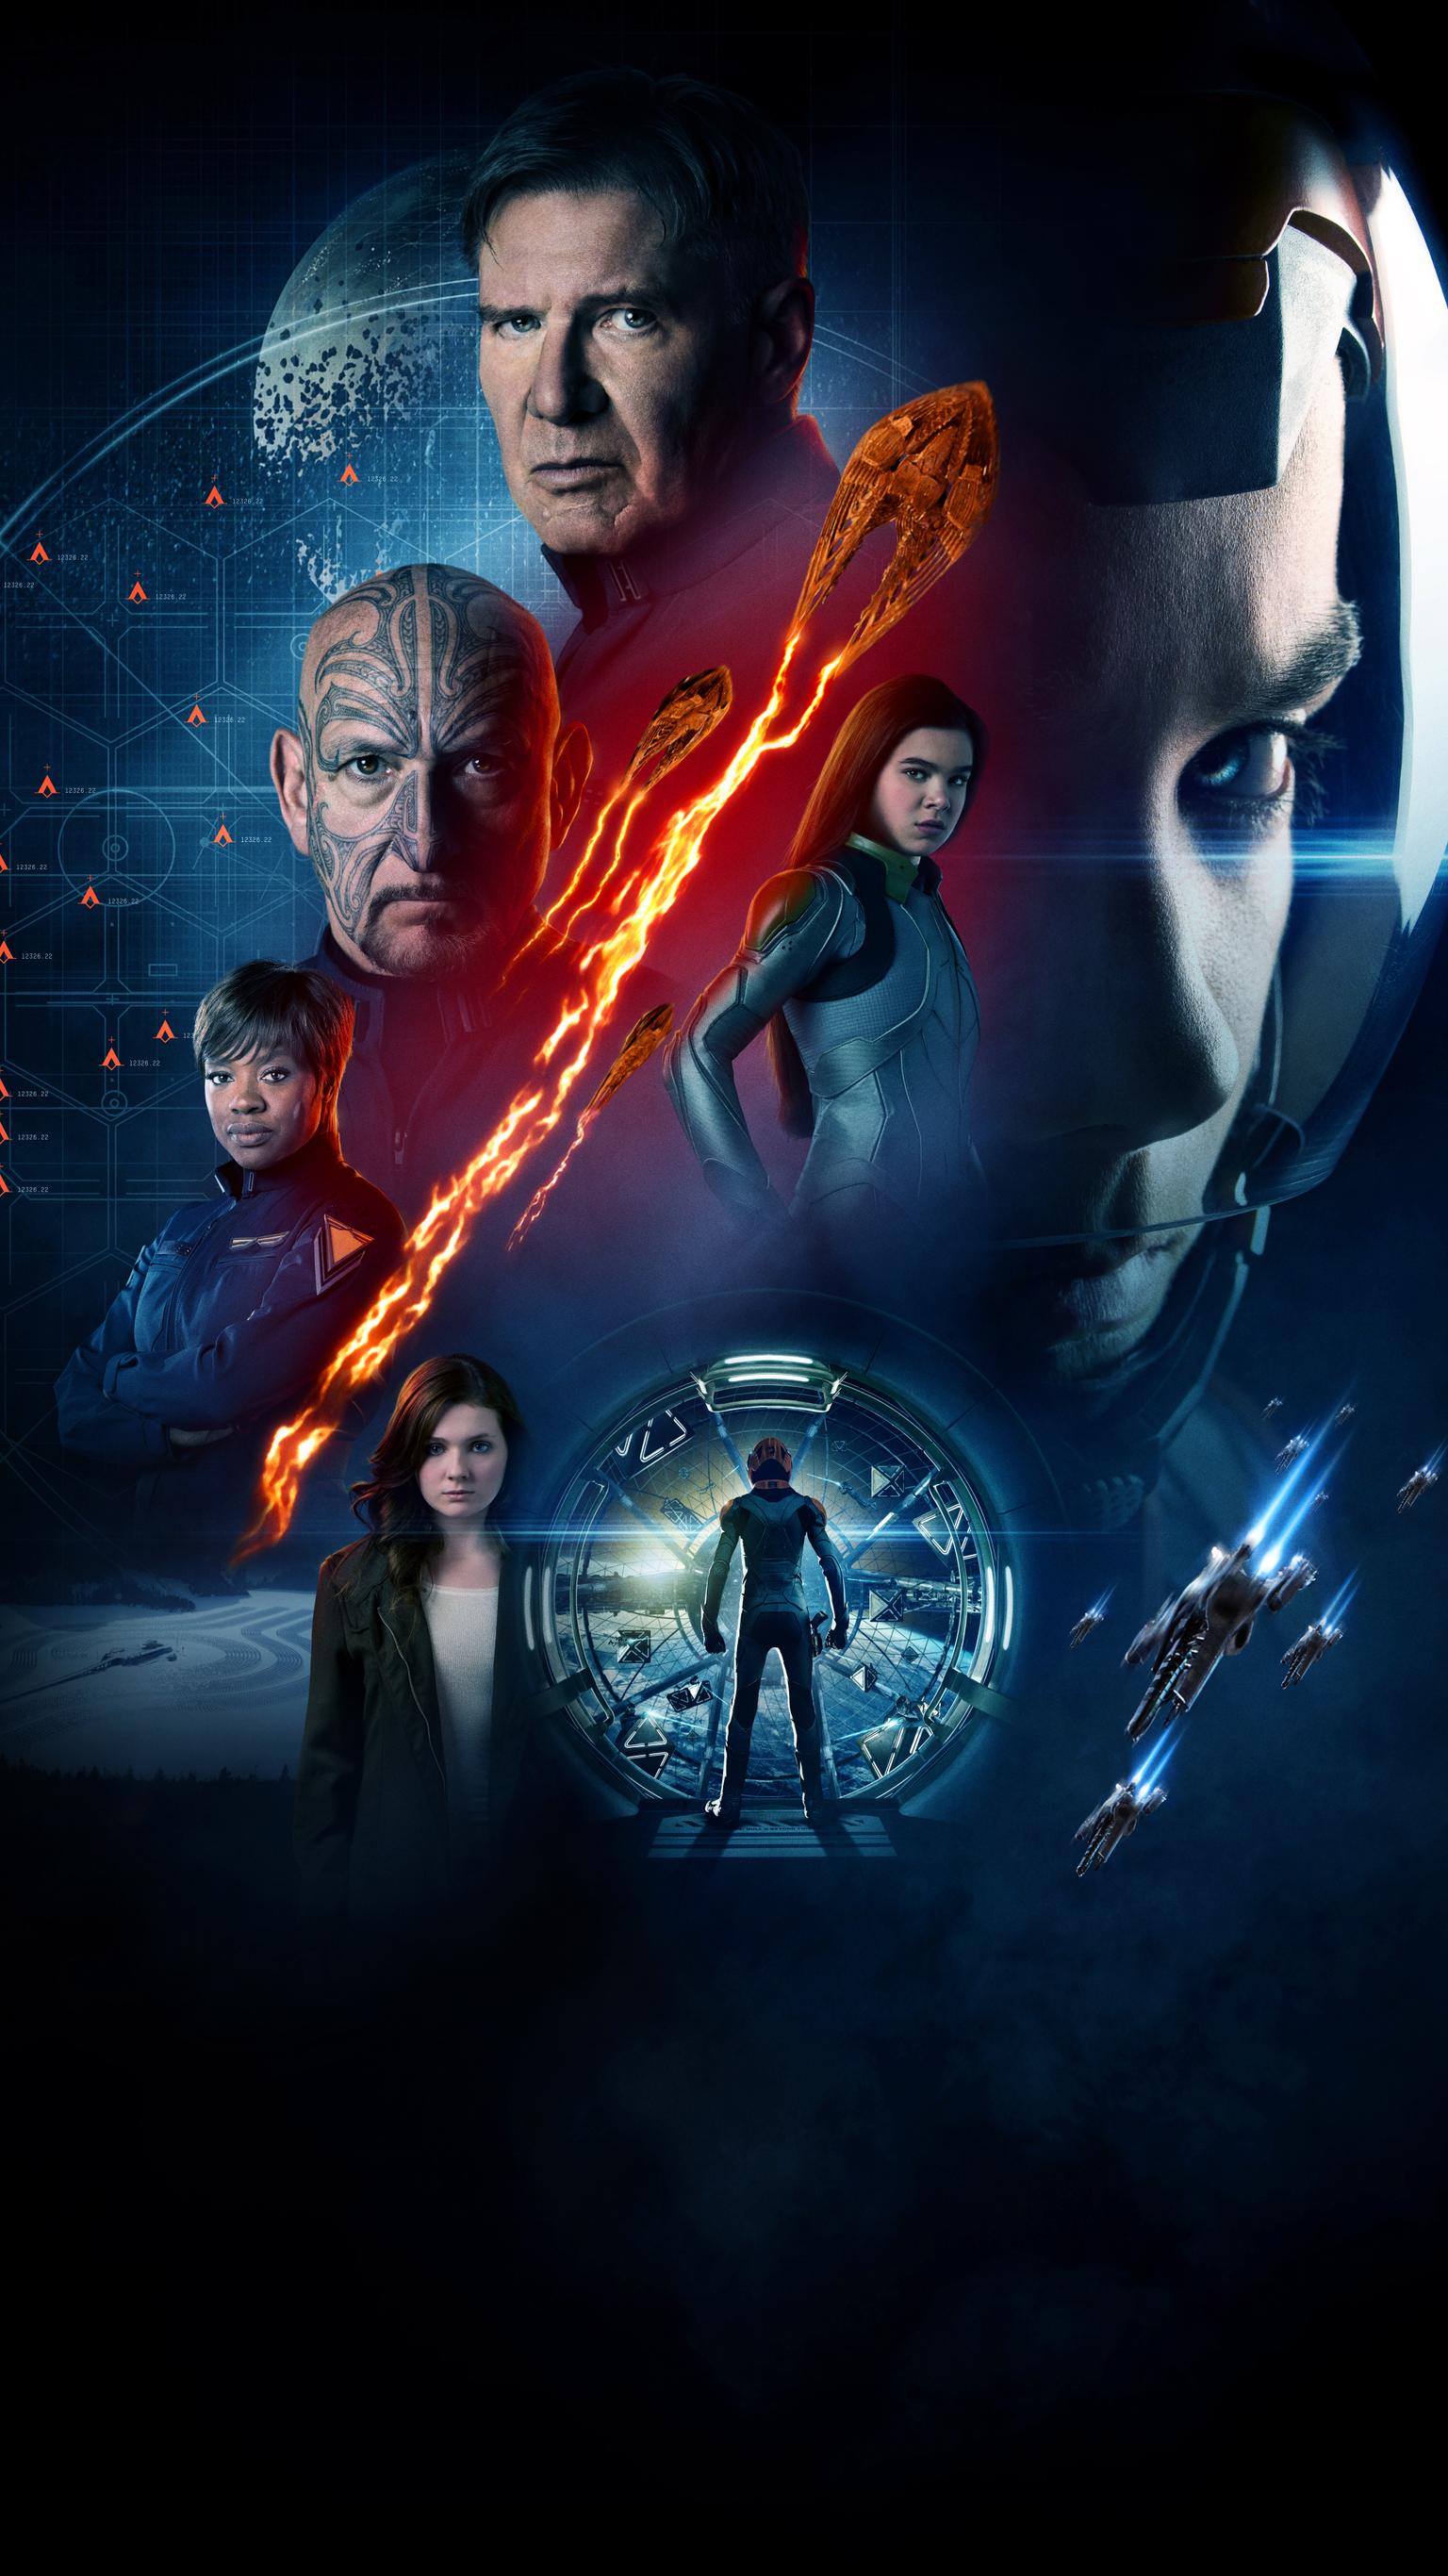 Ender'S Game Wallpapers